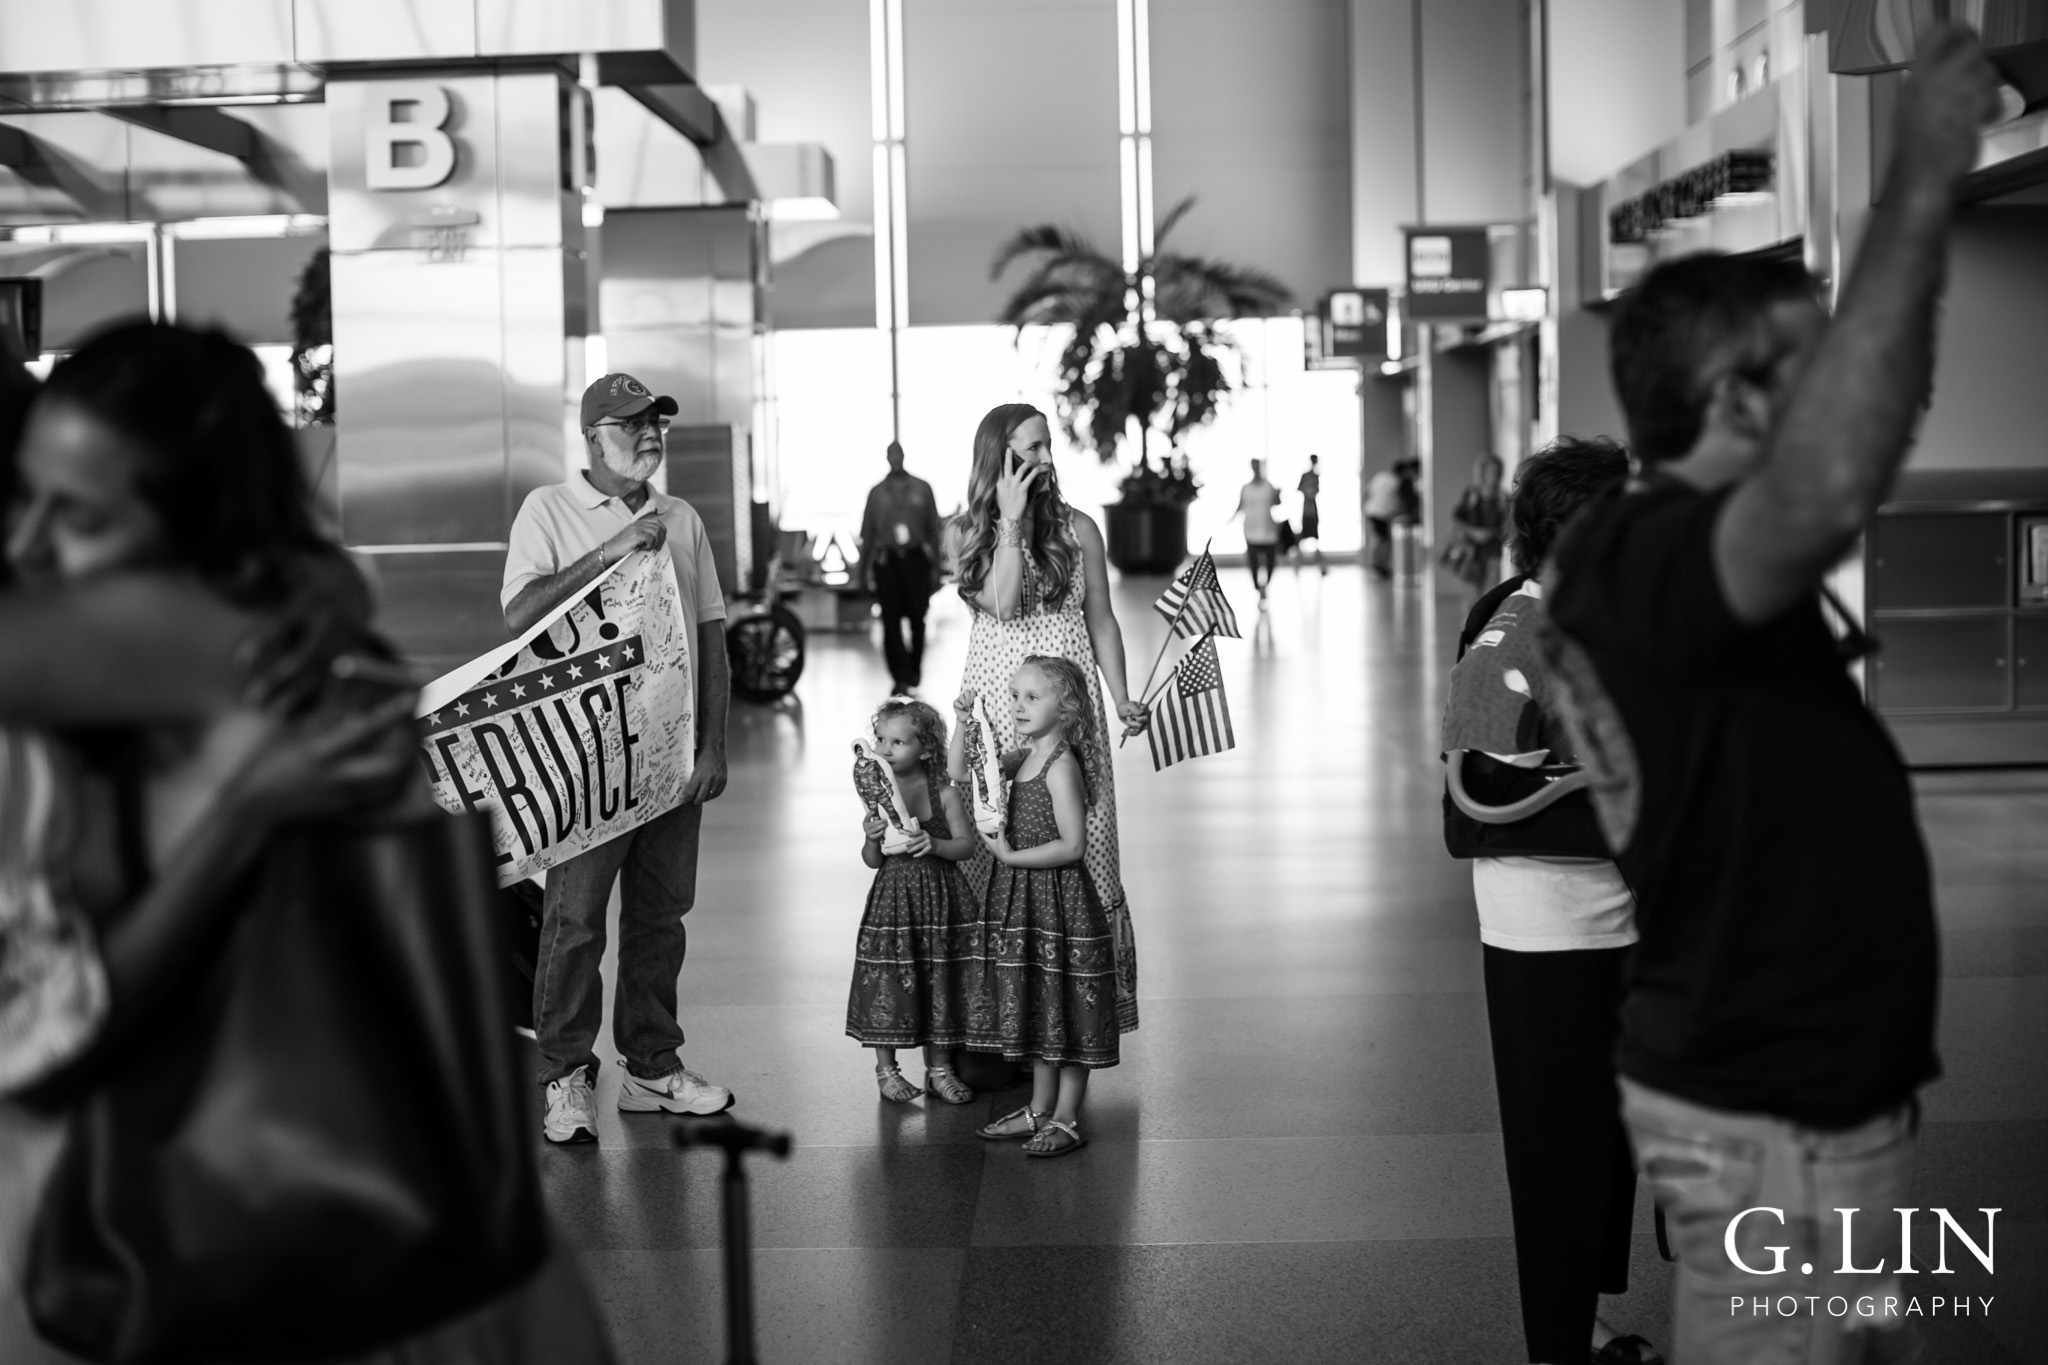 Raleigh Family Photographer | G. Lin Photography | wife on the phone waiting for husband at airport